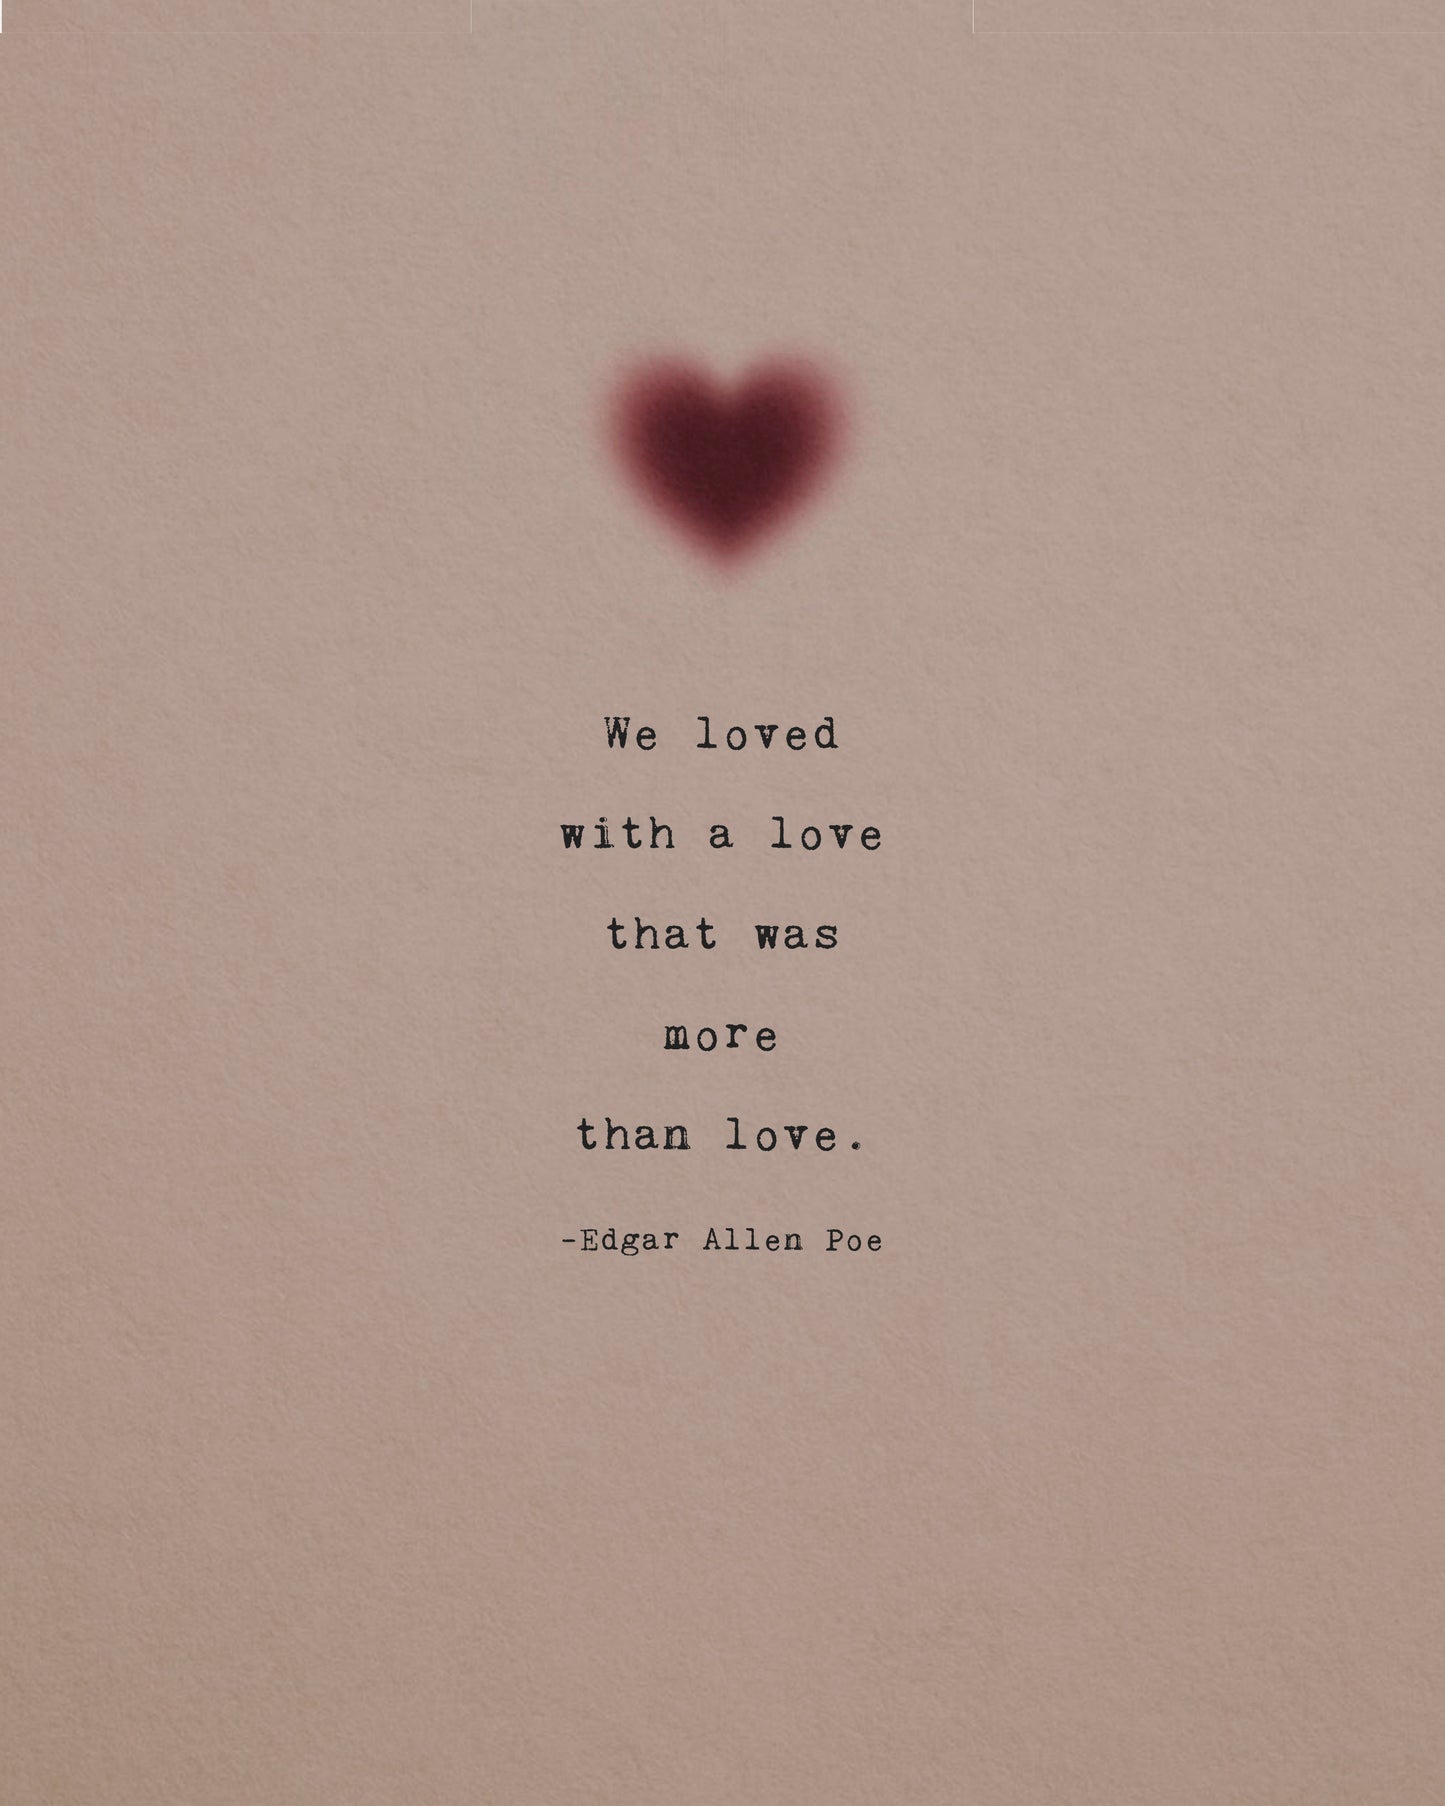 Edgar Allen Poe quote art "We loved with a love that was more than love" wall art